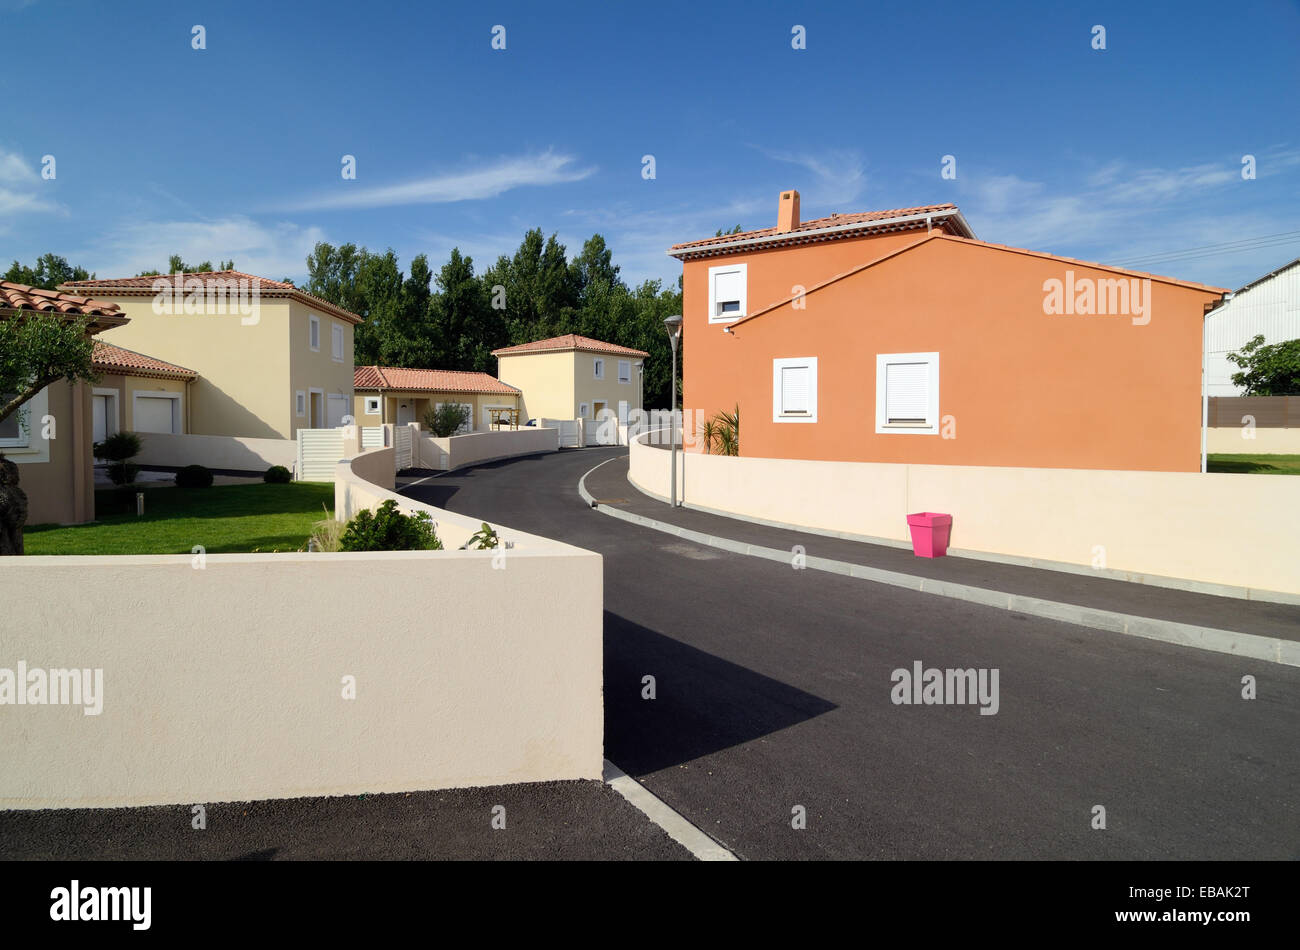 New Suburban Housing Estate or New Houses at Les Pennes-Mirabeau Bouches-du-Rhône Provence France Stock Photo